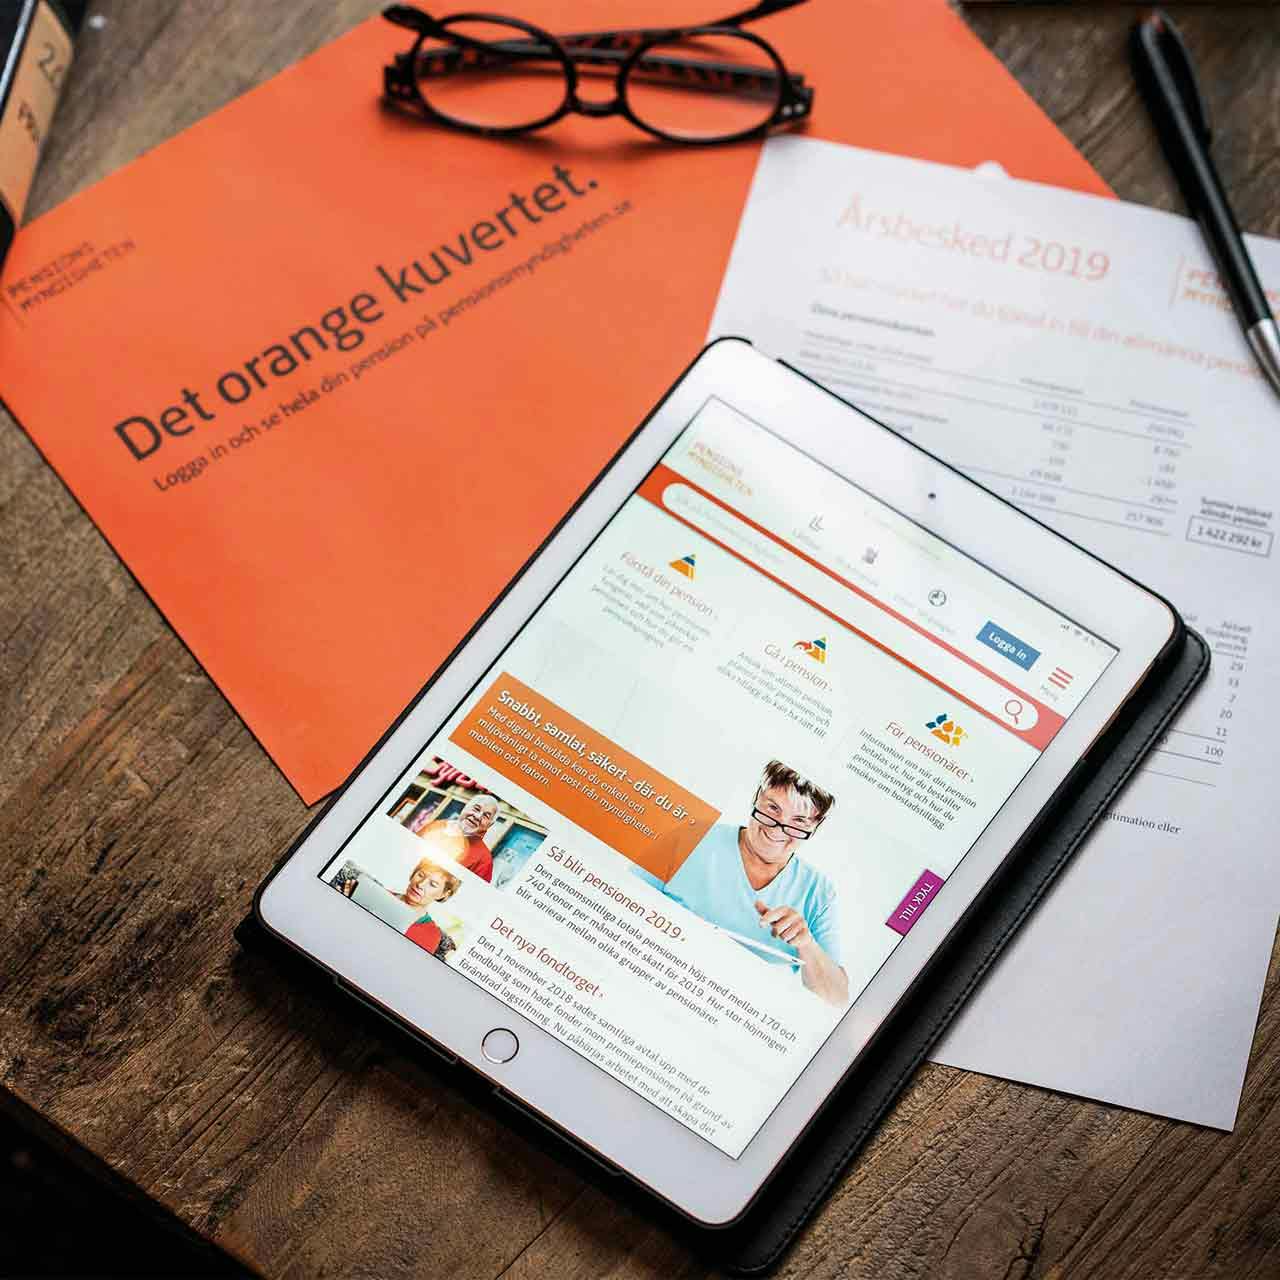 The Swedish Pensions Agency's website, "The Orange Envelope," is displayed on an iPad.